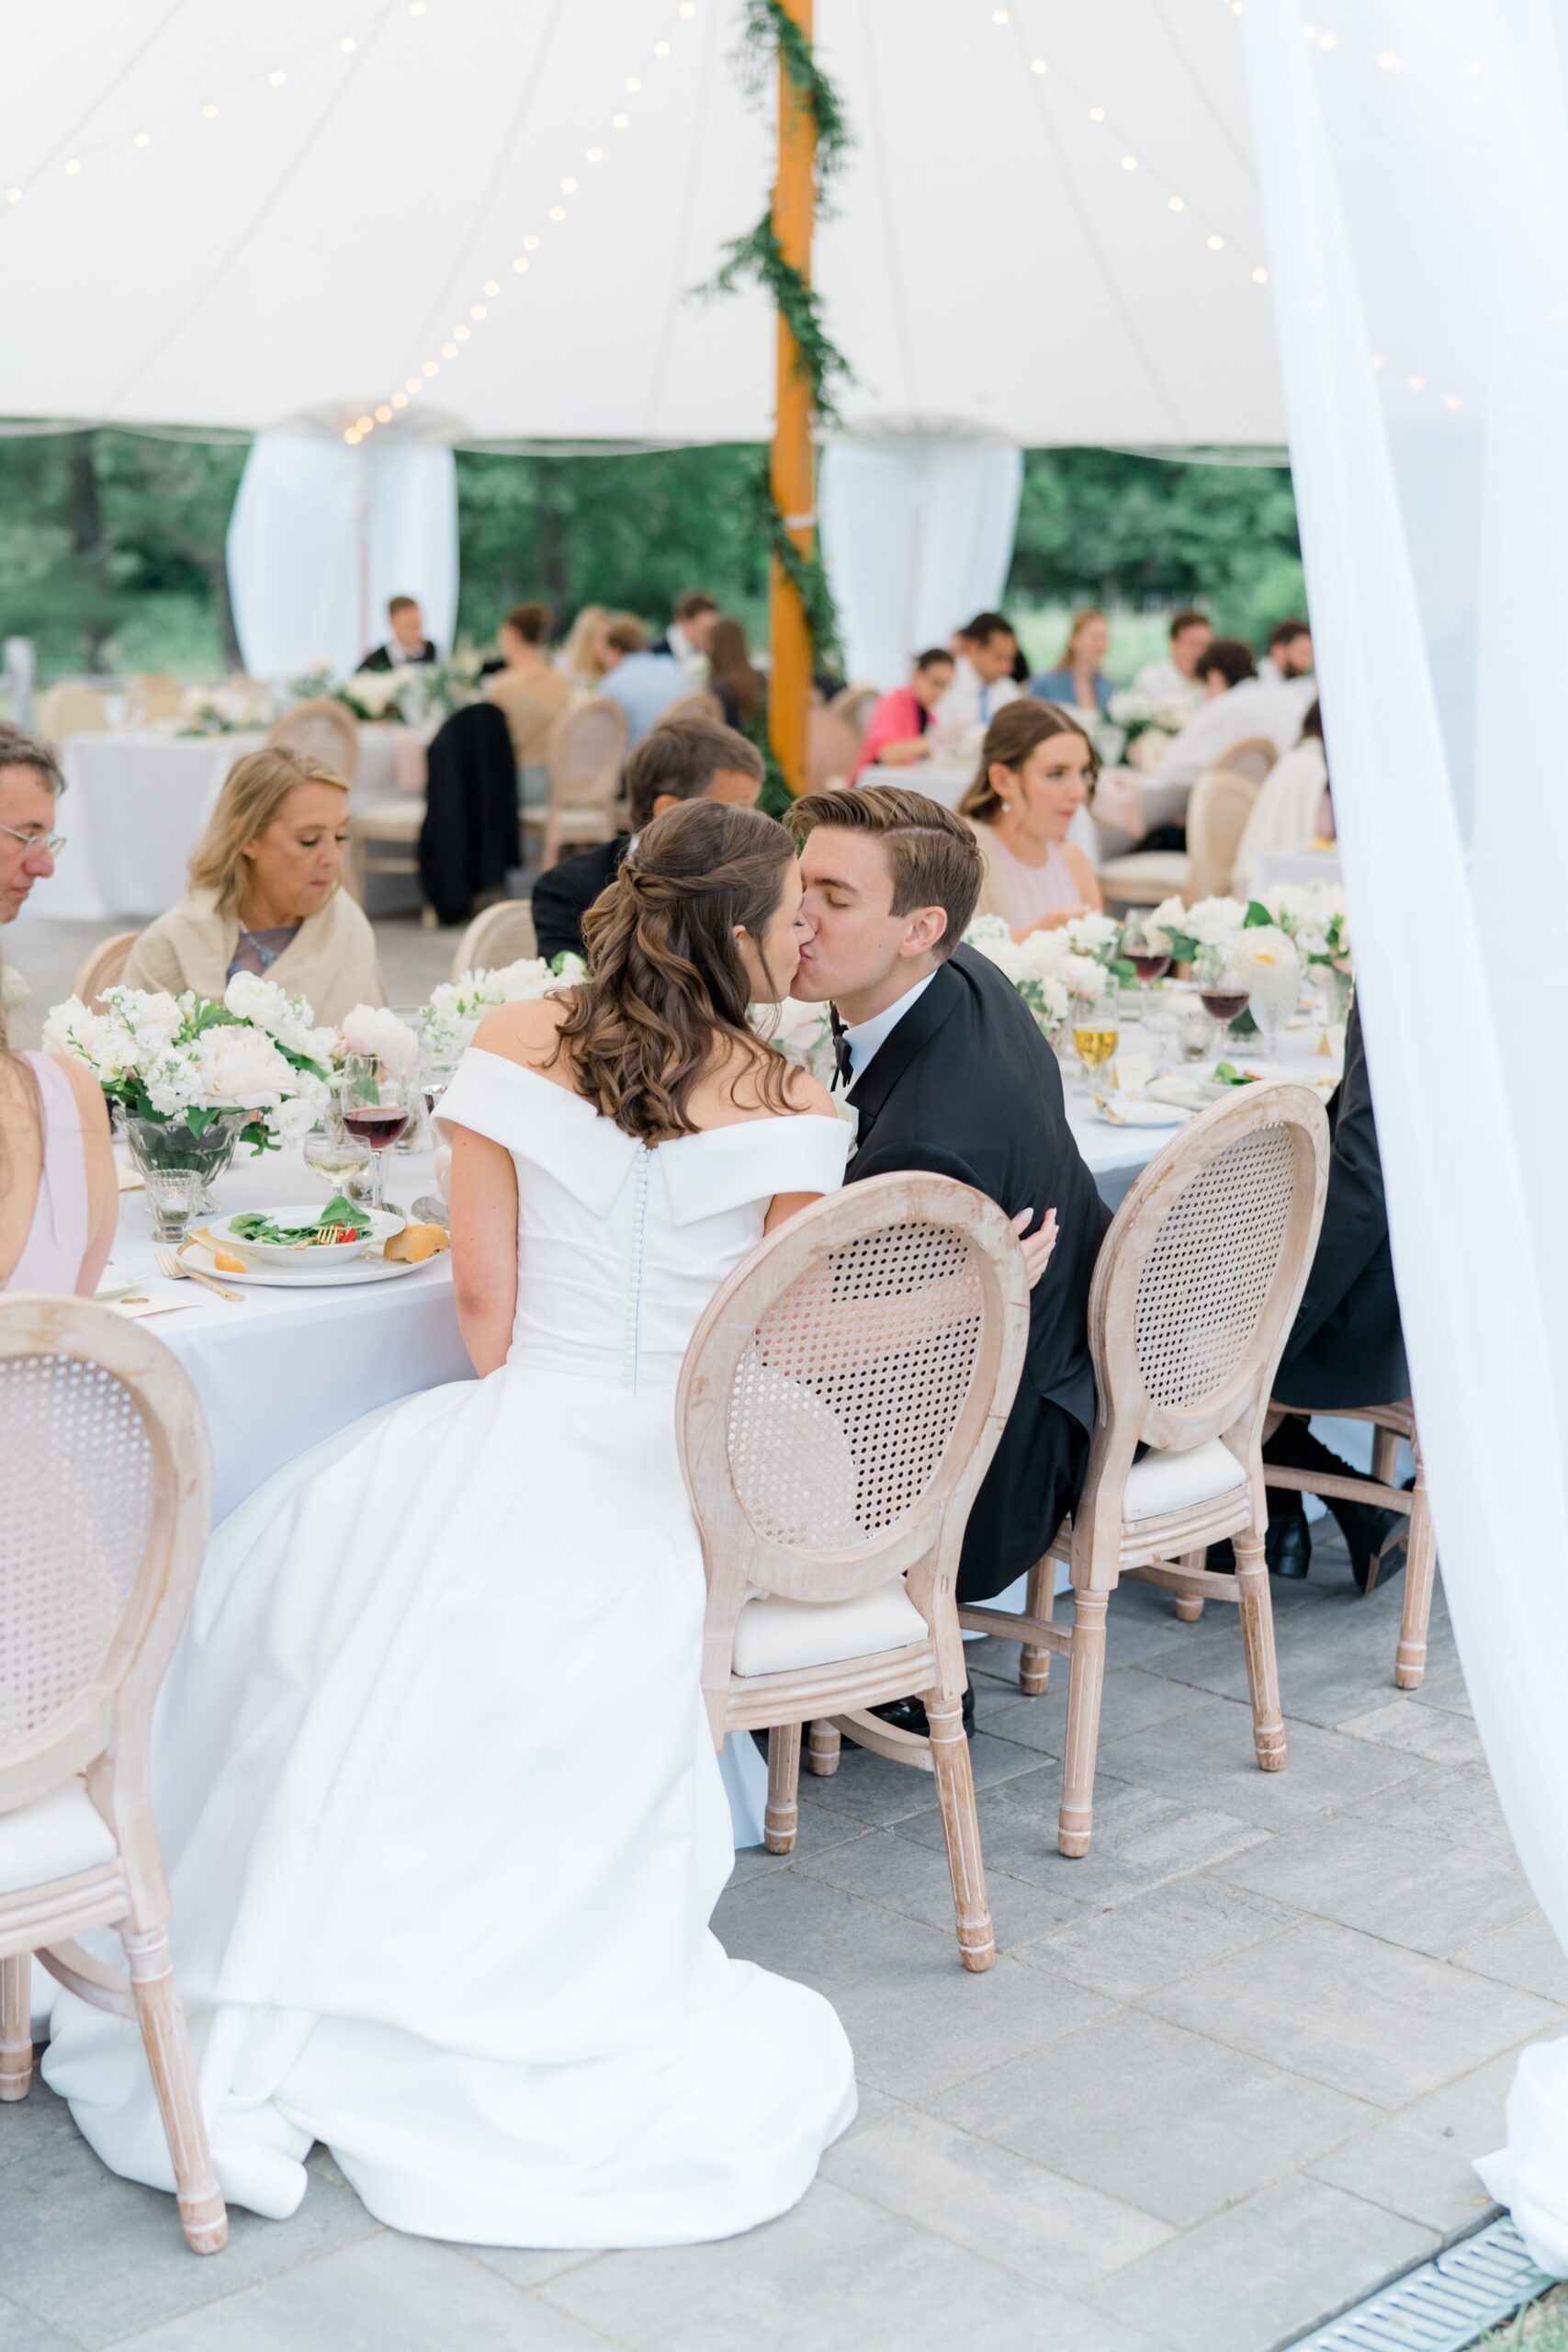 Bride and groom kiss at head table under tent with string lights and lush greenery covered tent pole.